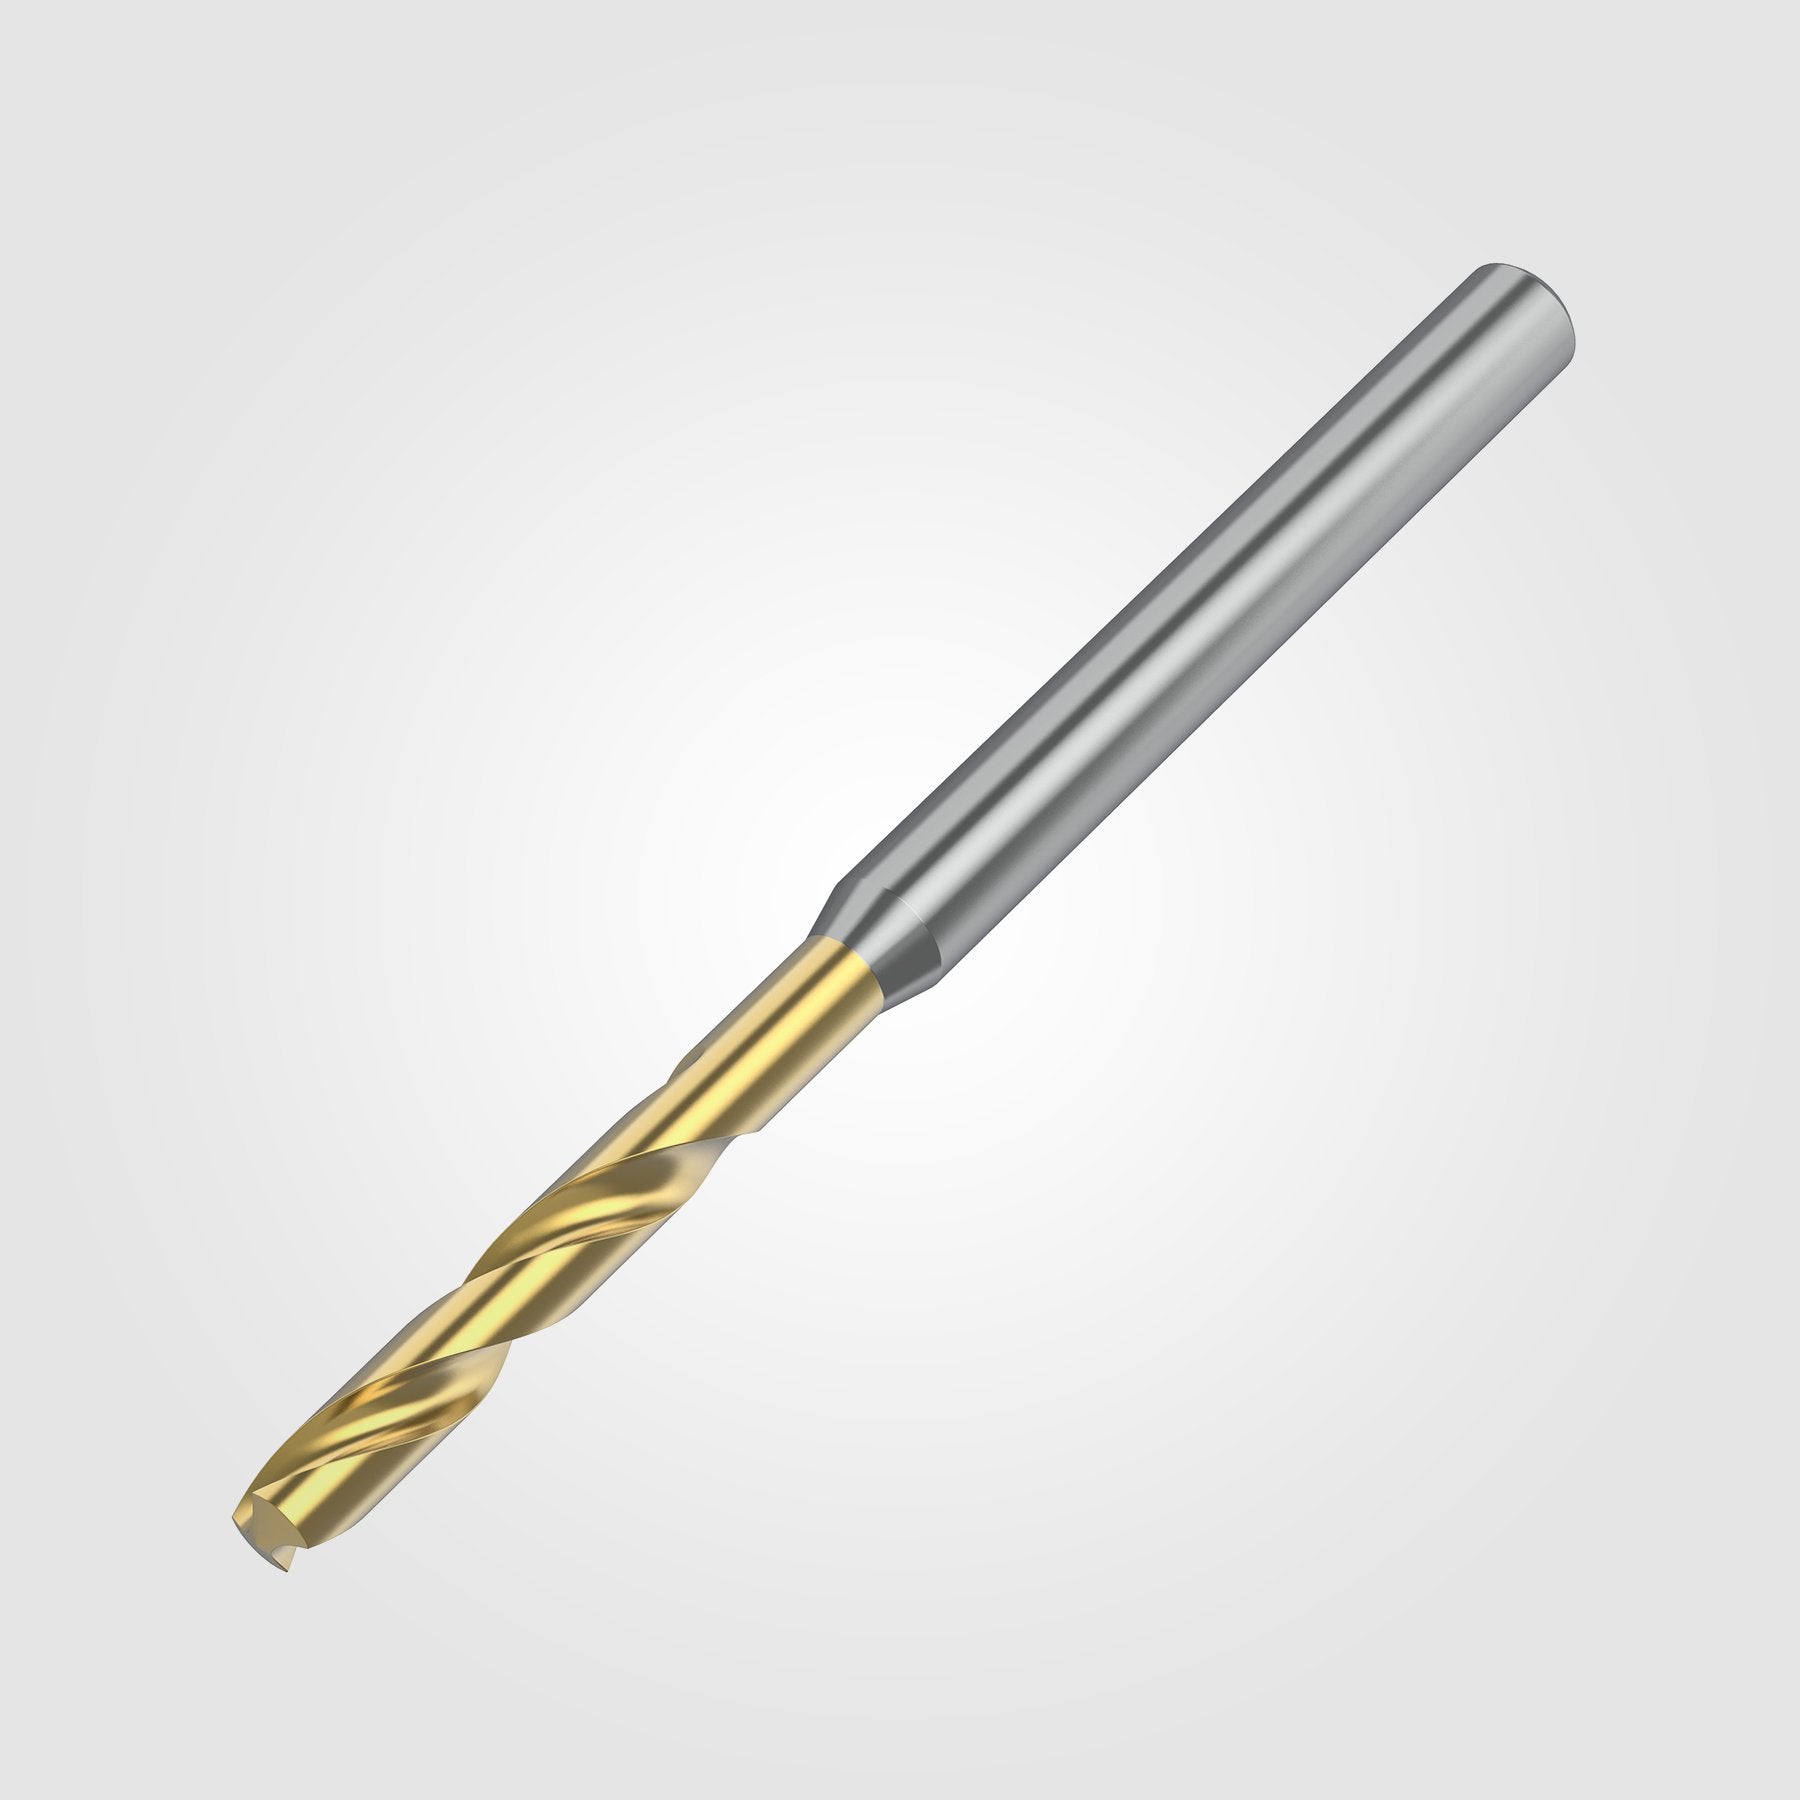 GOdrill (THROUGH COOLANT) | 11mm / .4331" / 3xD | SOLID CARBIDE DRILL | 4151216